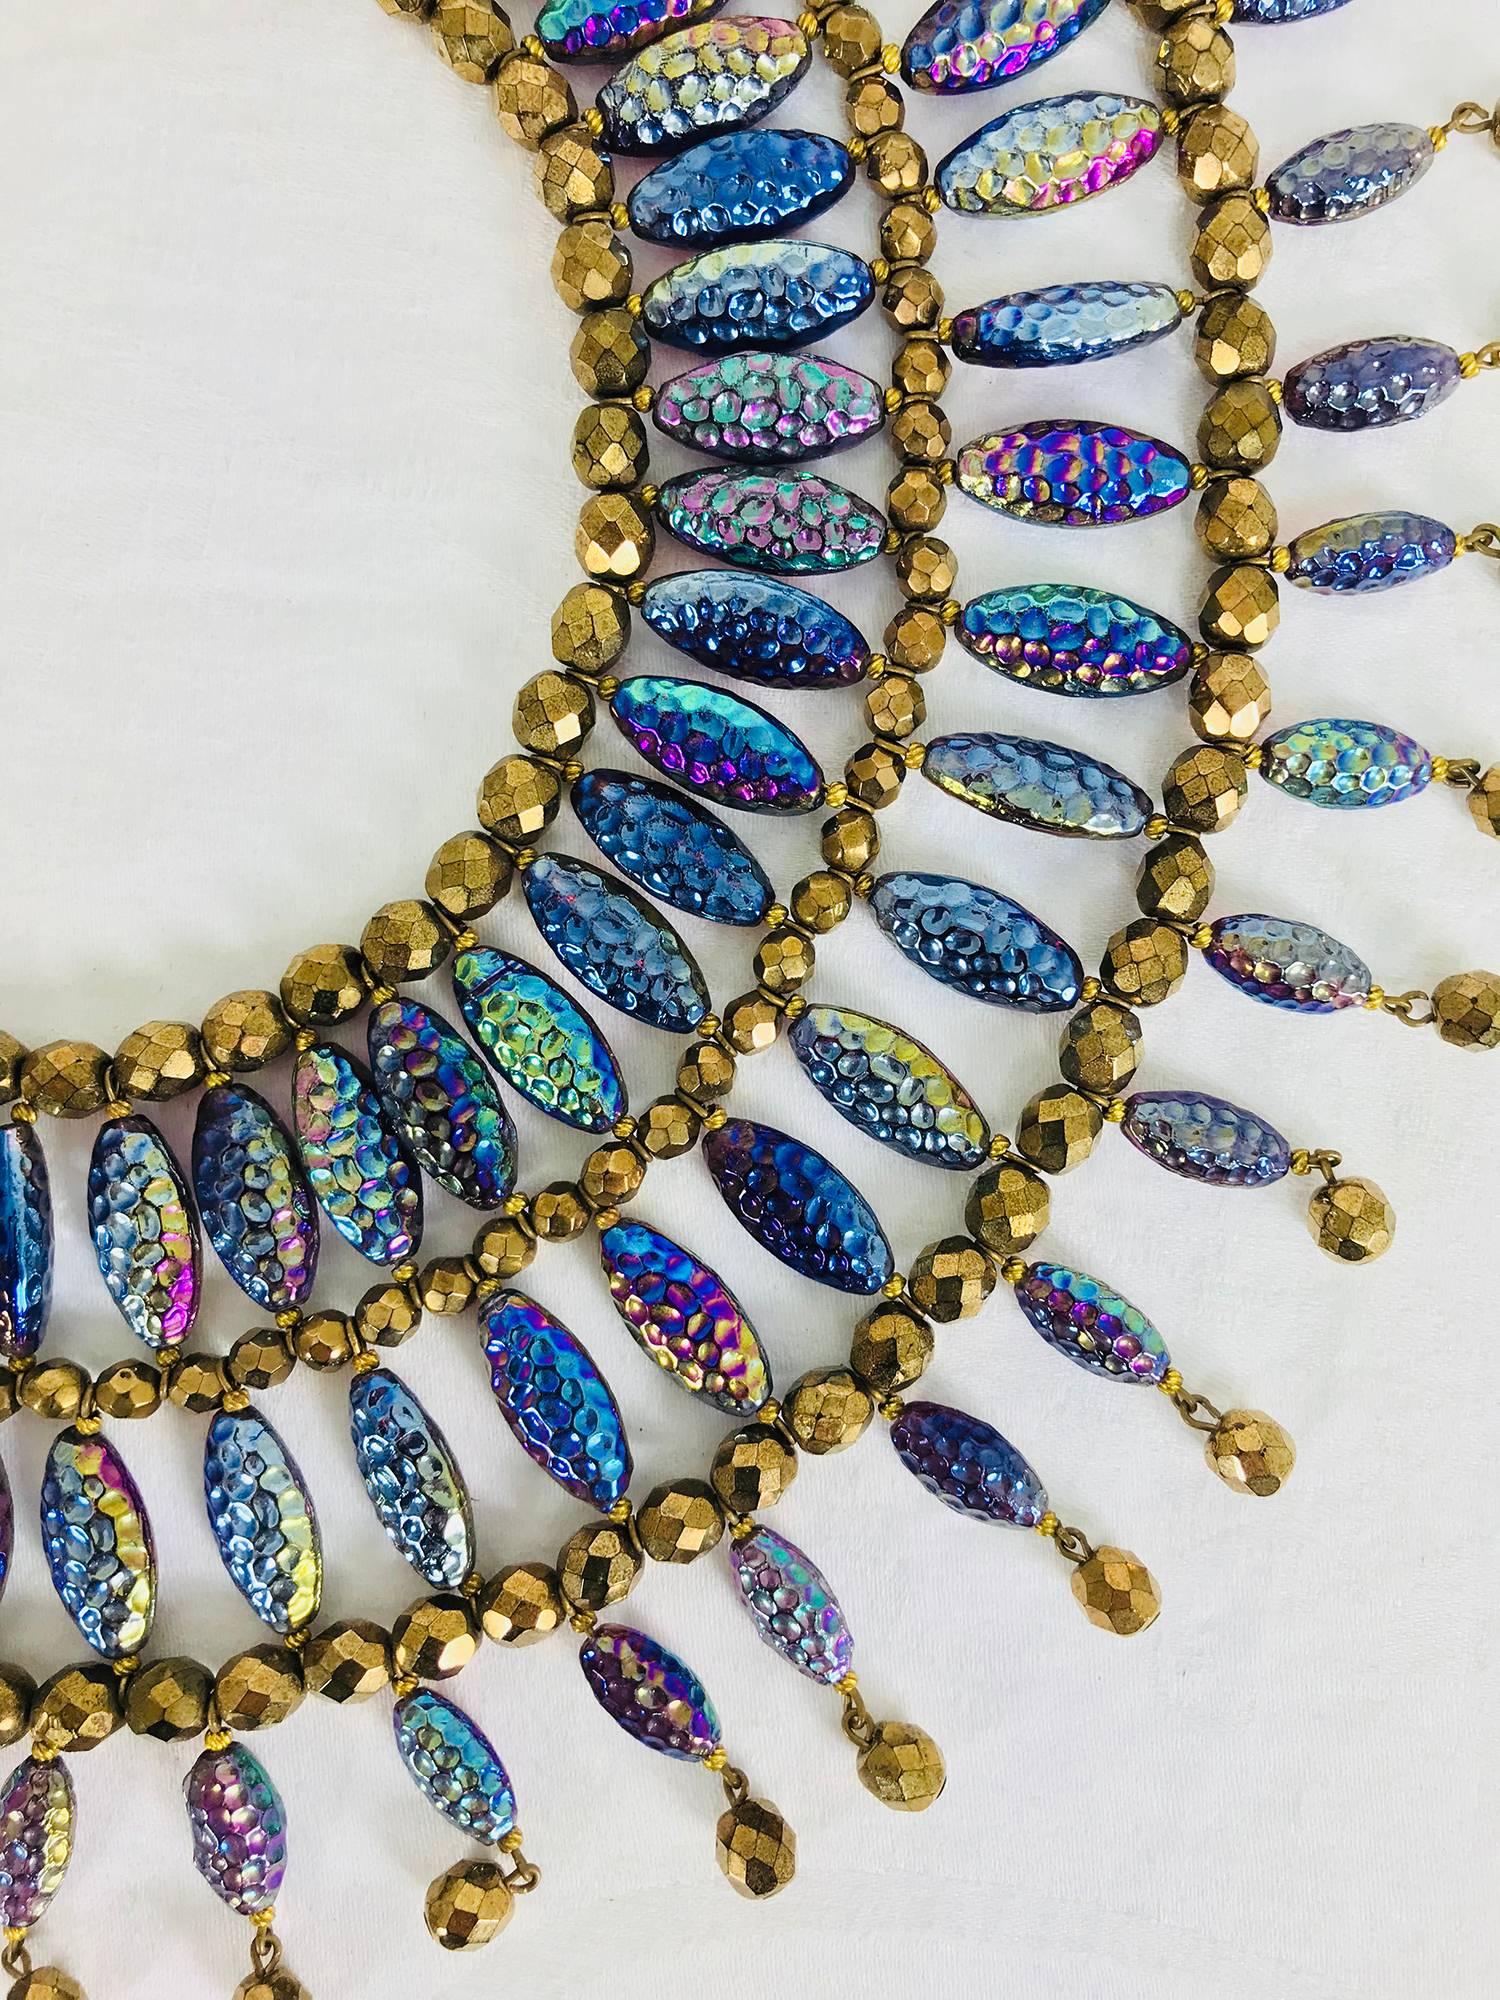 Lester Joy of Les Bernard huge textured iridescent glass beaded collar necklace...This necklace is marked Joy, designed by Lester Joy, the Les of Les Bernard Jewelry...From the 1970s the colours are spectacular iridescent blues with gold bronze